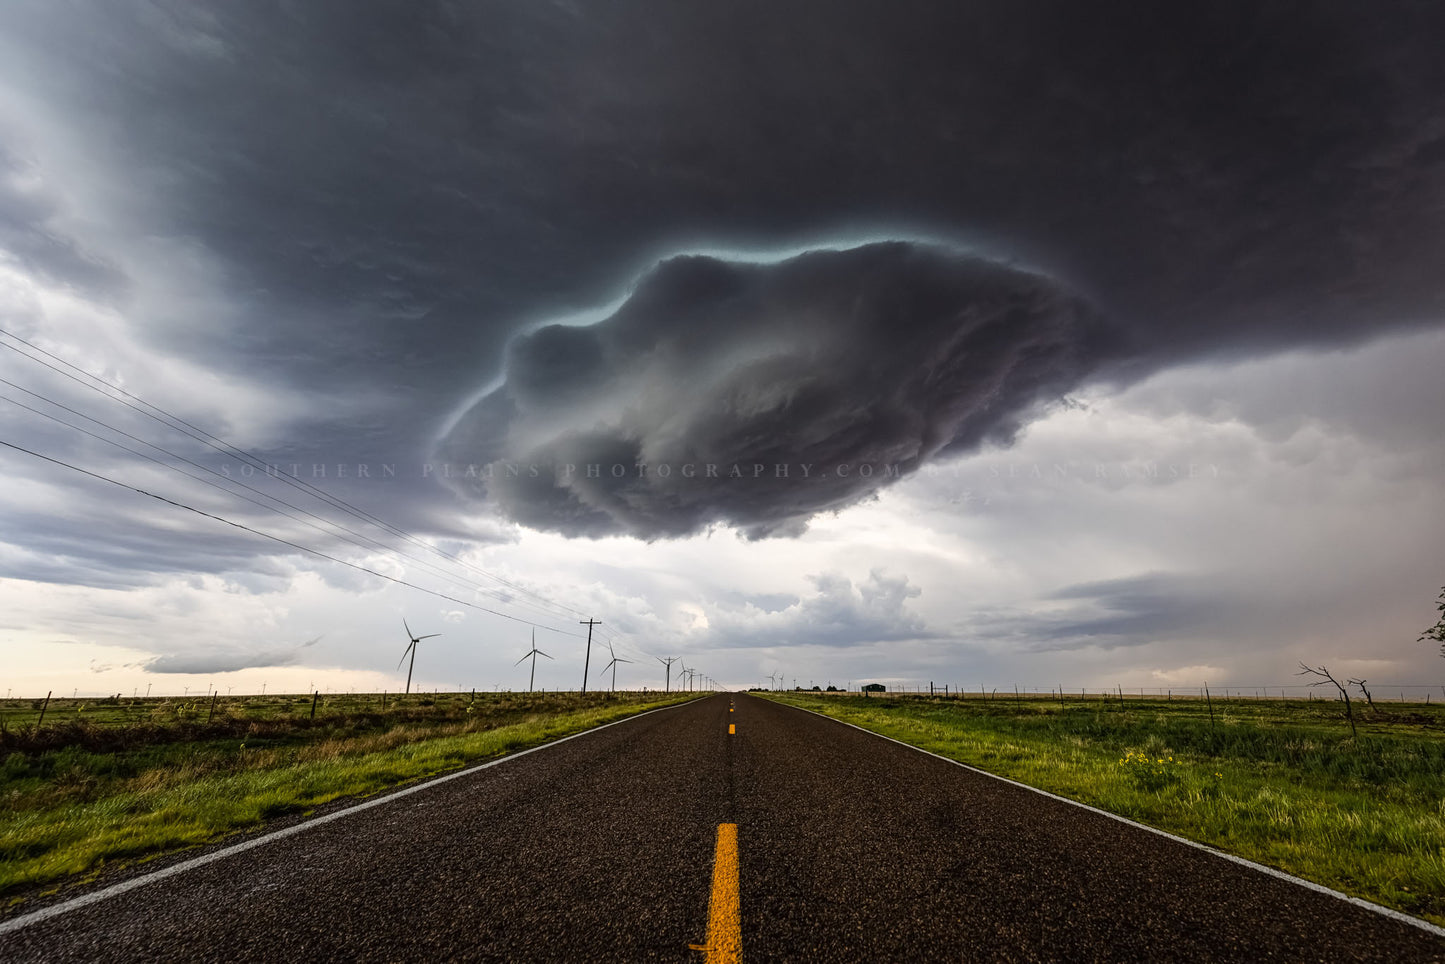 Storm photography print of a supercell thunderstorm wall cloud appearing as a UFO over a highway on a stormy spring day in New Mexico by Sean Ramsey of Southern Plains Photography.